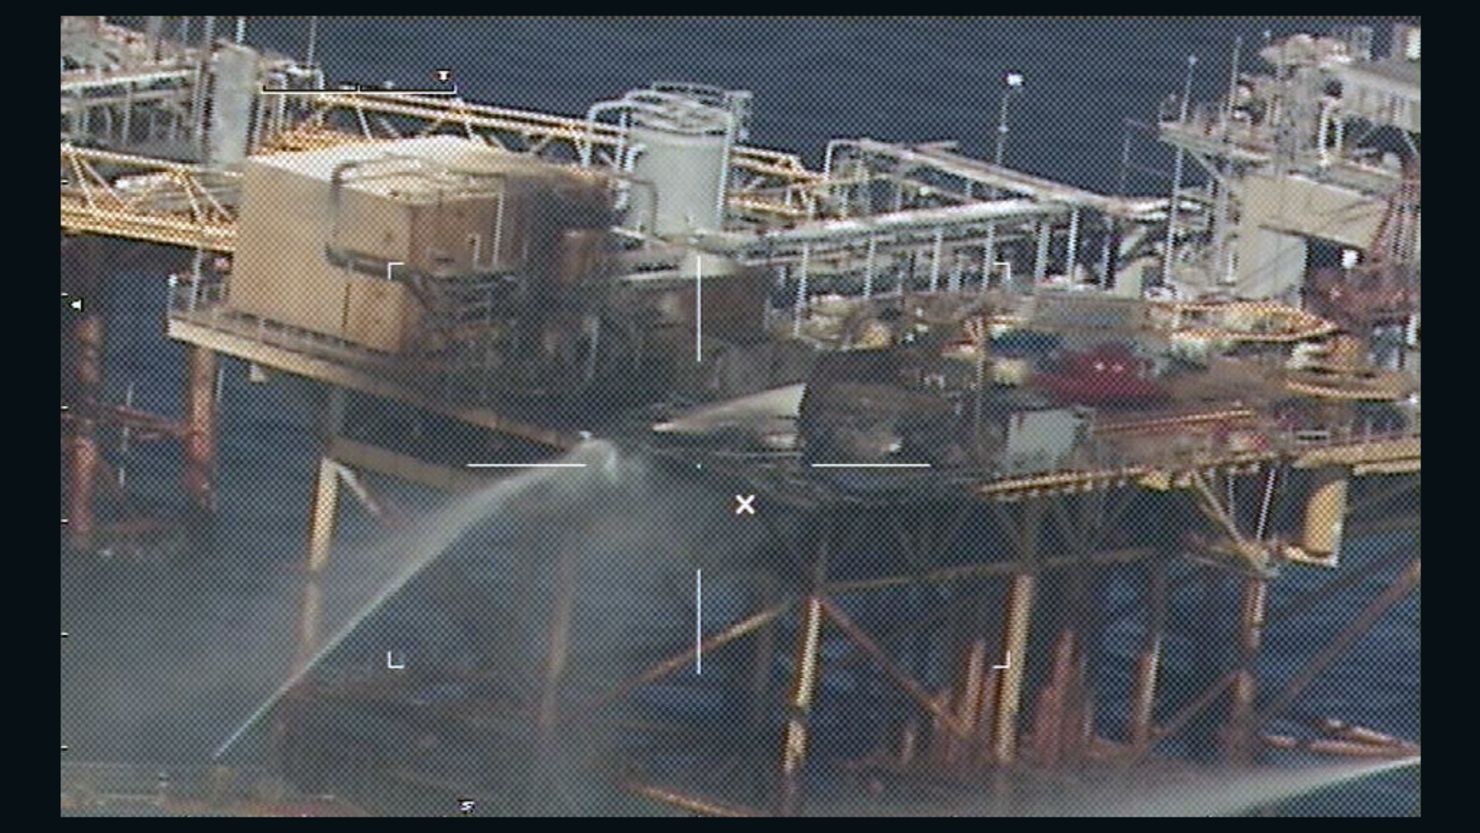 Commercial vessels extinguish a fire at an oil platform about 20 miles off Grand Isle, Louisiana, last week.